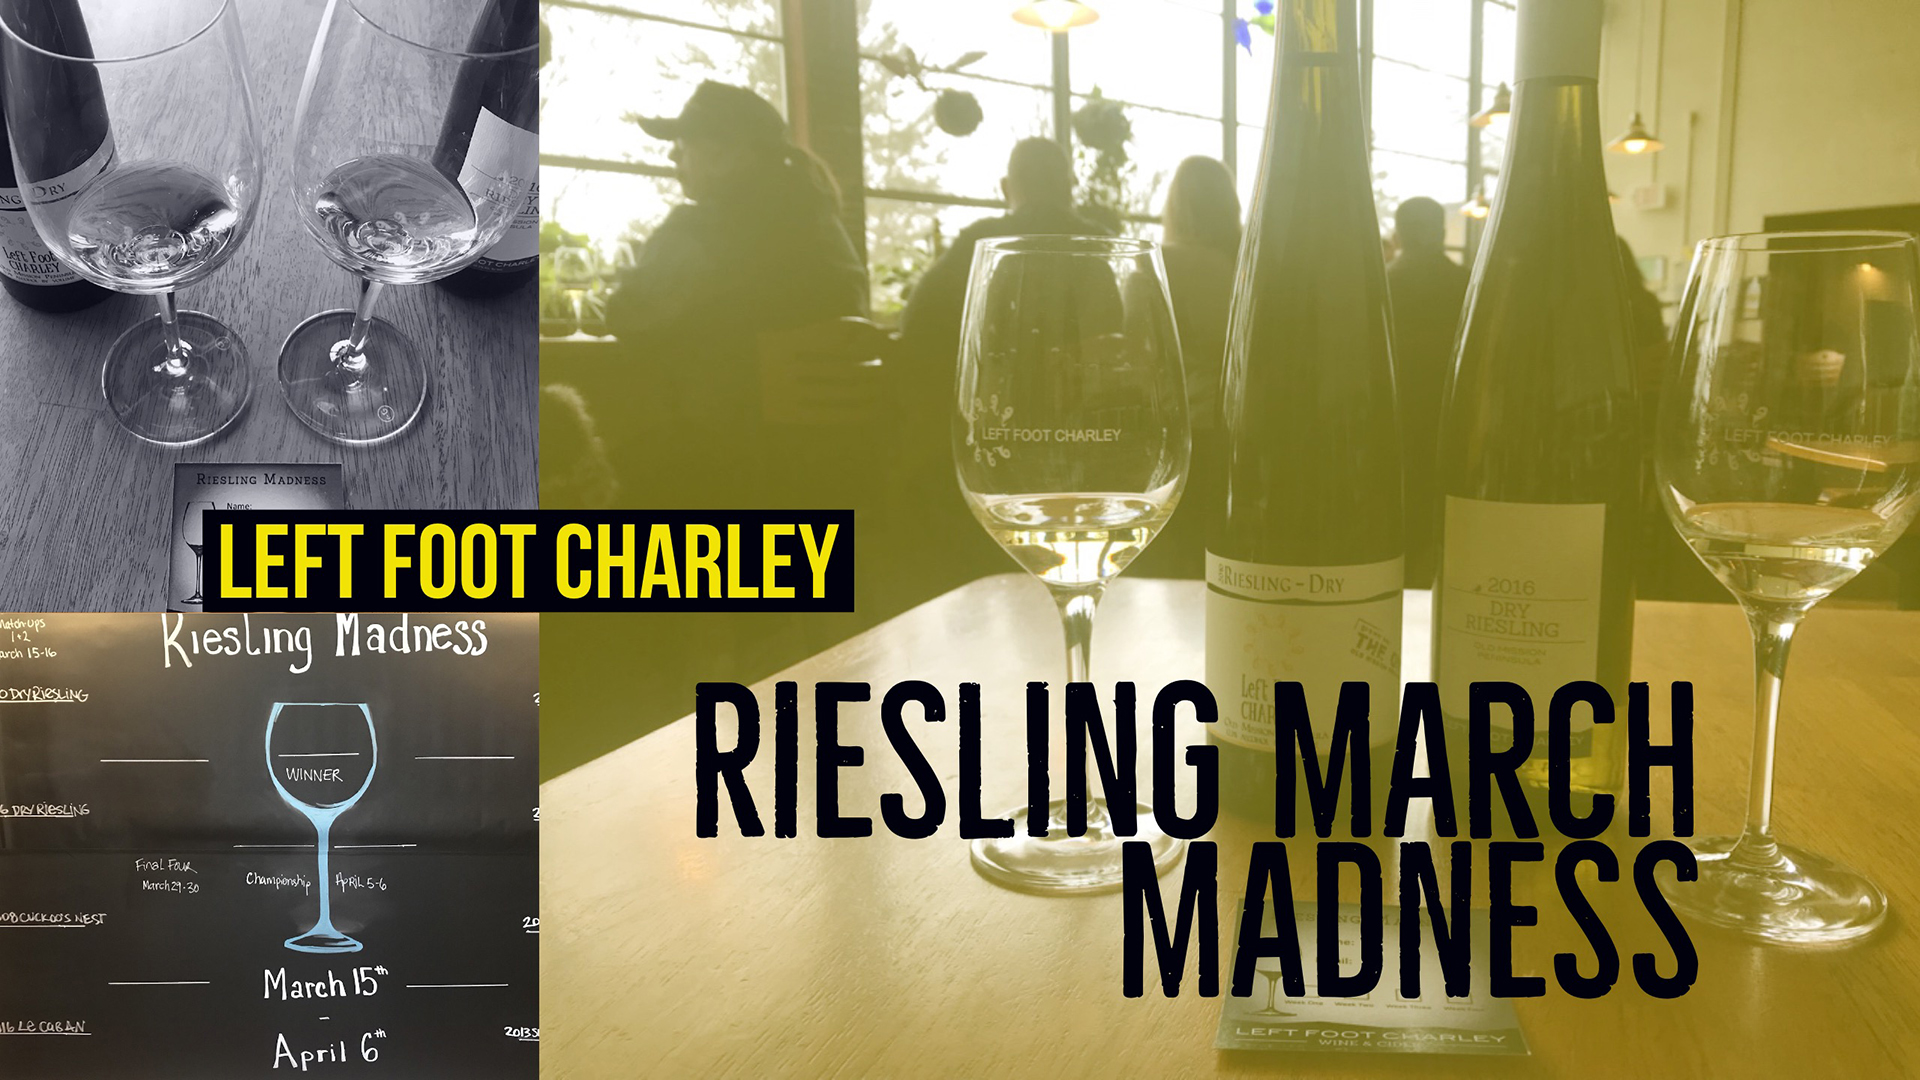 Left Foot Charley Riesling Madness image